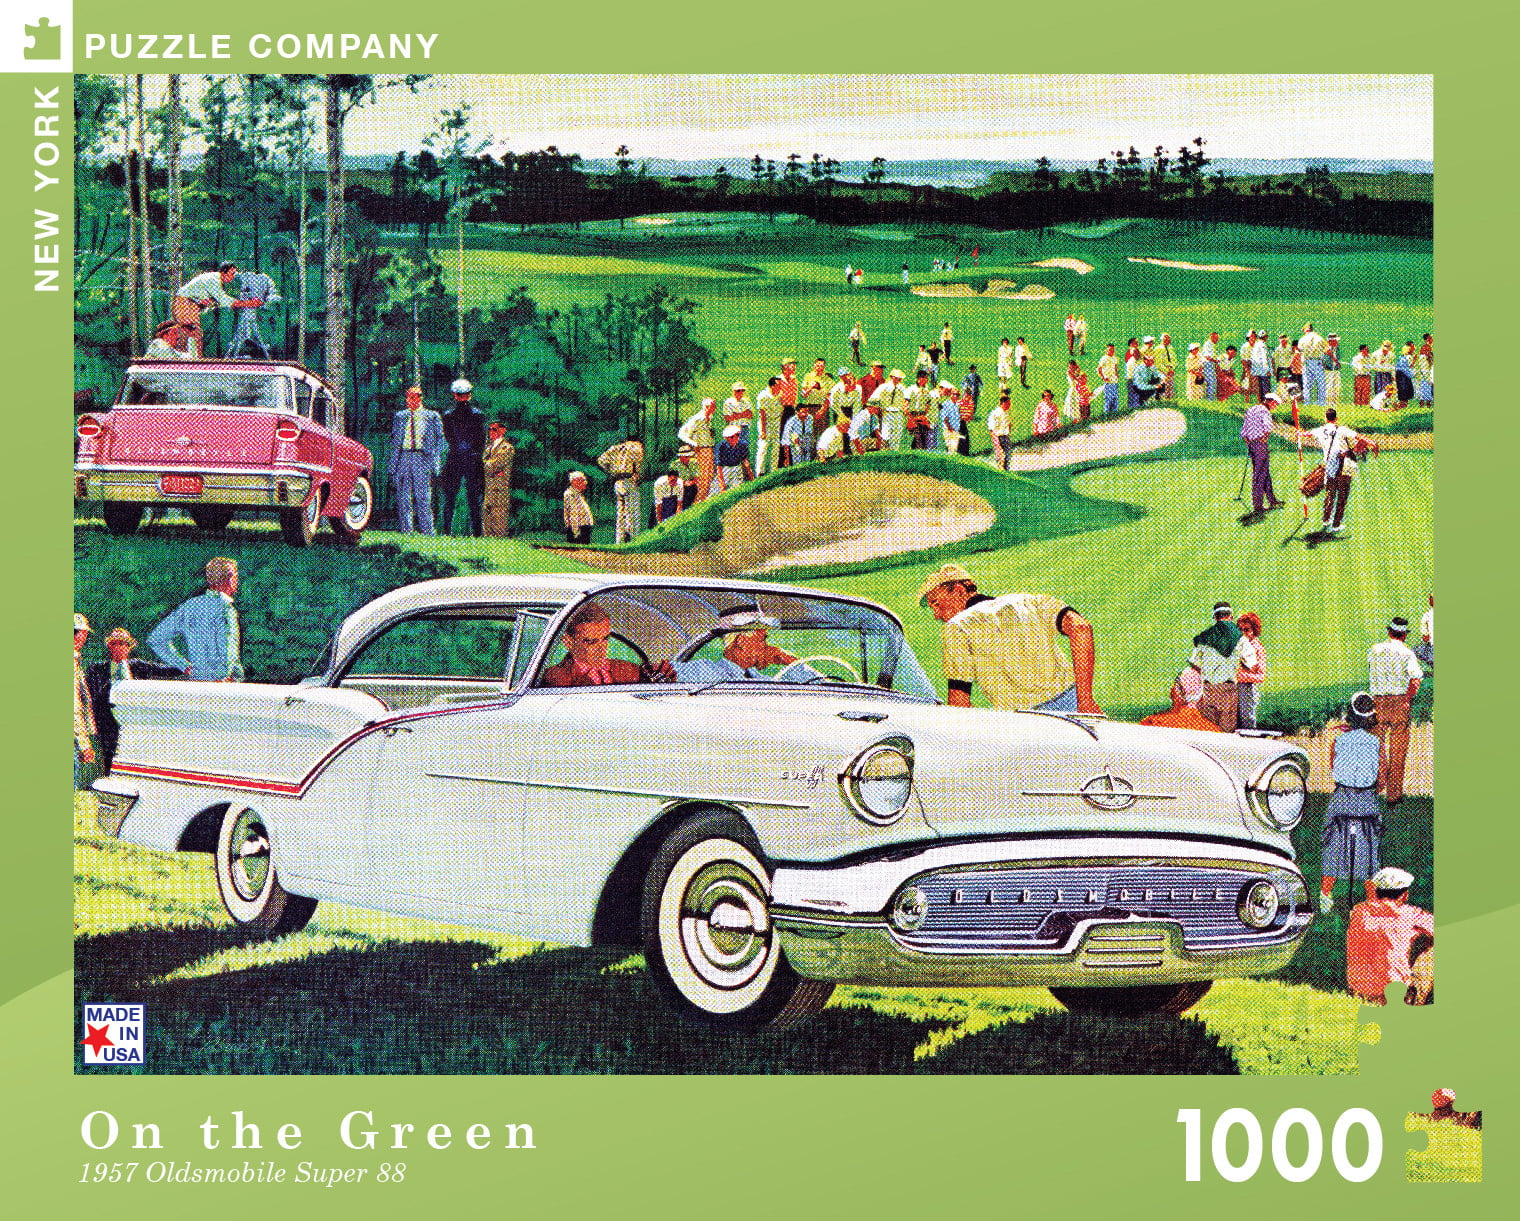 On the Green 1000 PC Jigsaw Puzzle